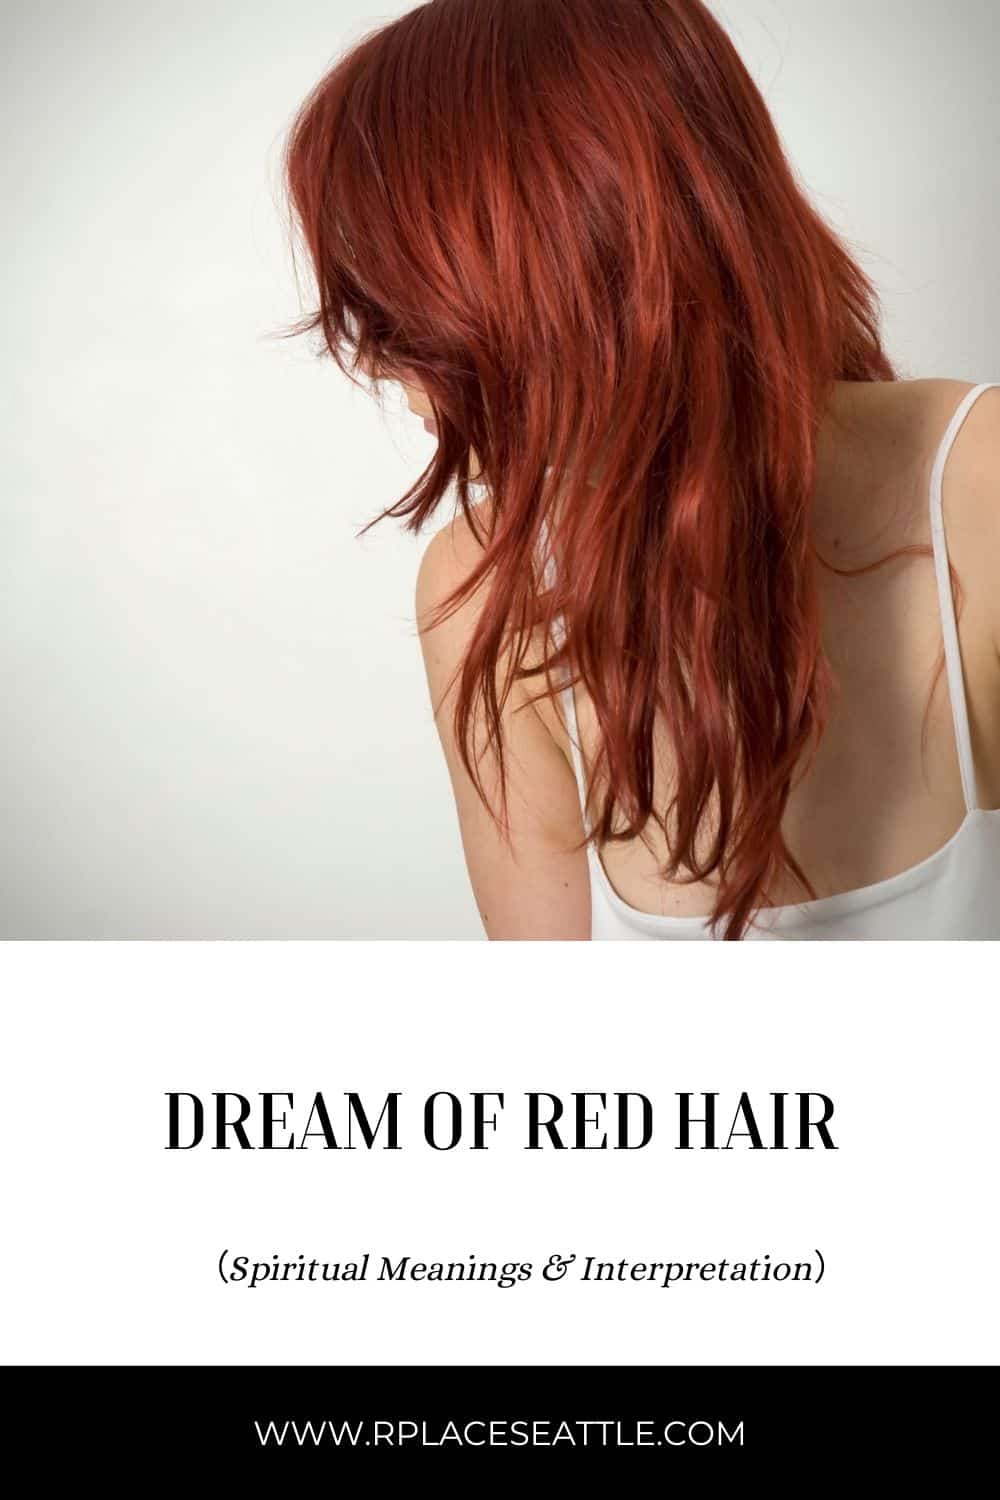 dream of red hair meaning